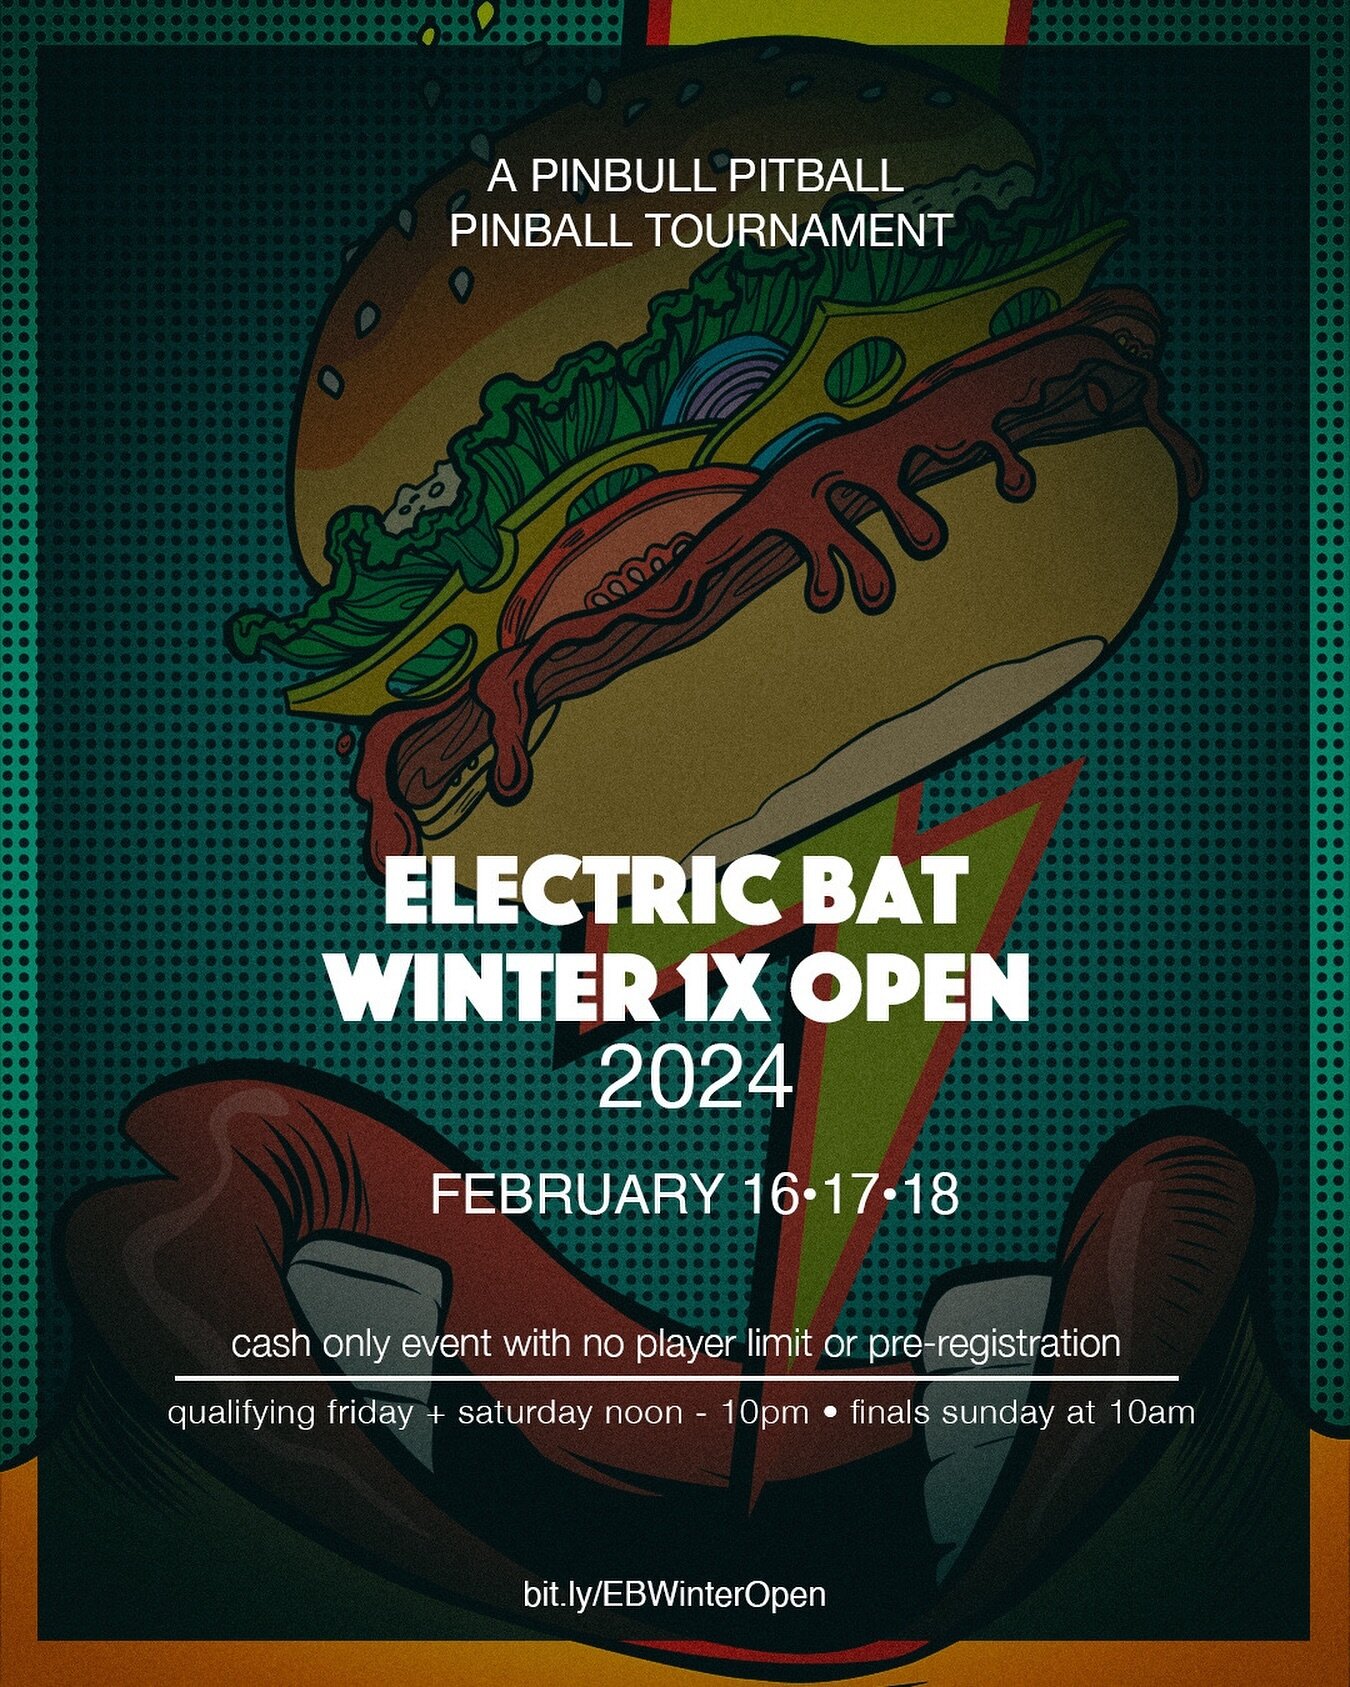 Get out of the cold, and step into the warmth of the bat cave for a WPPRtunity unlike anything Arizona has seen. Details in bio link. 
.
.
.
#pinball